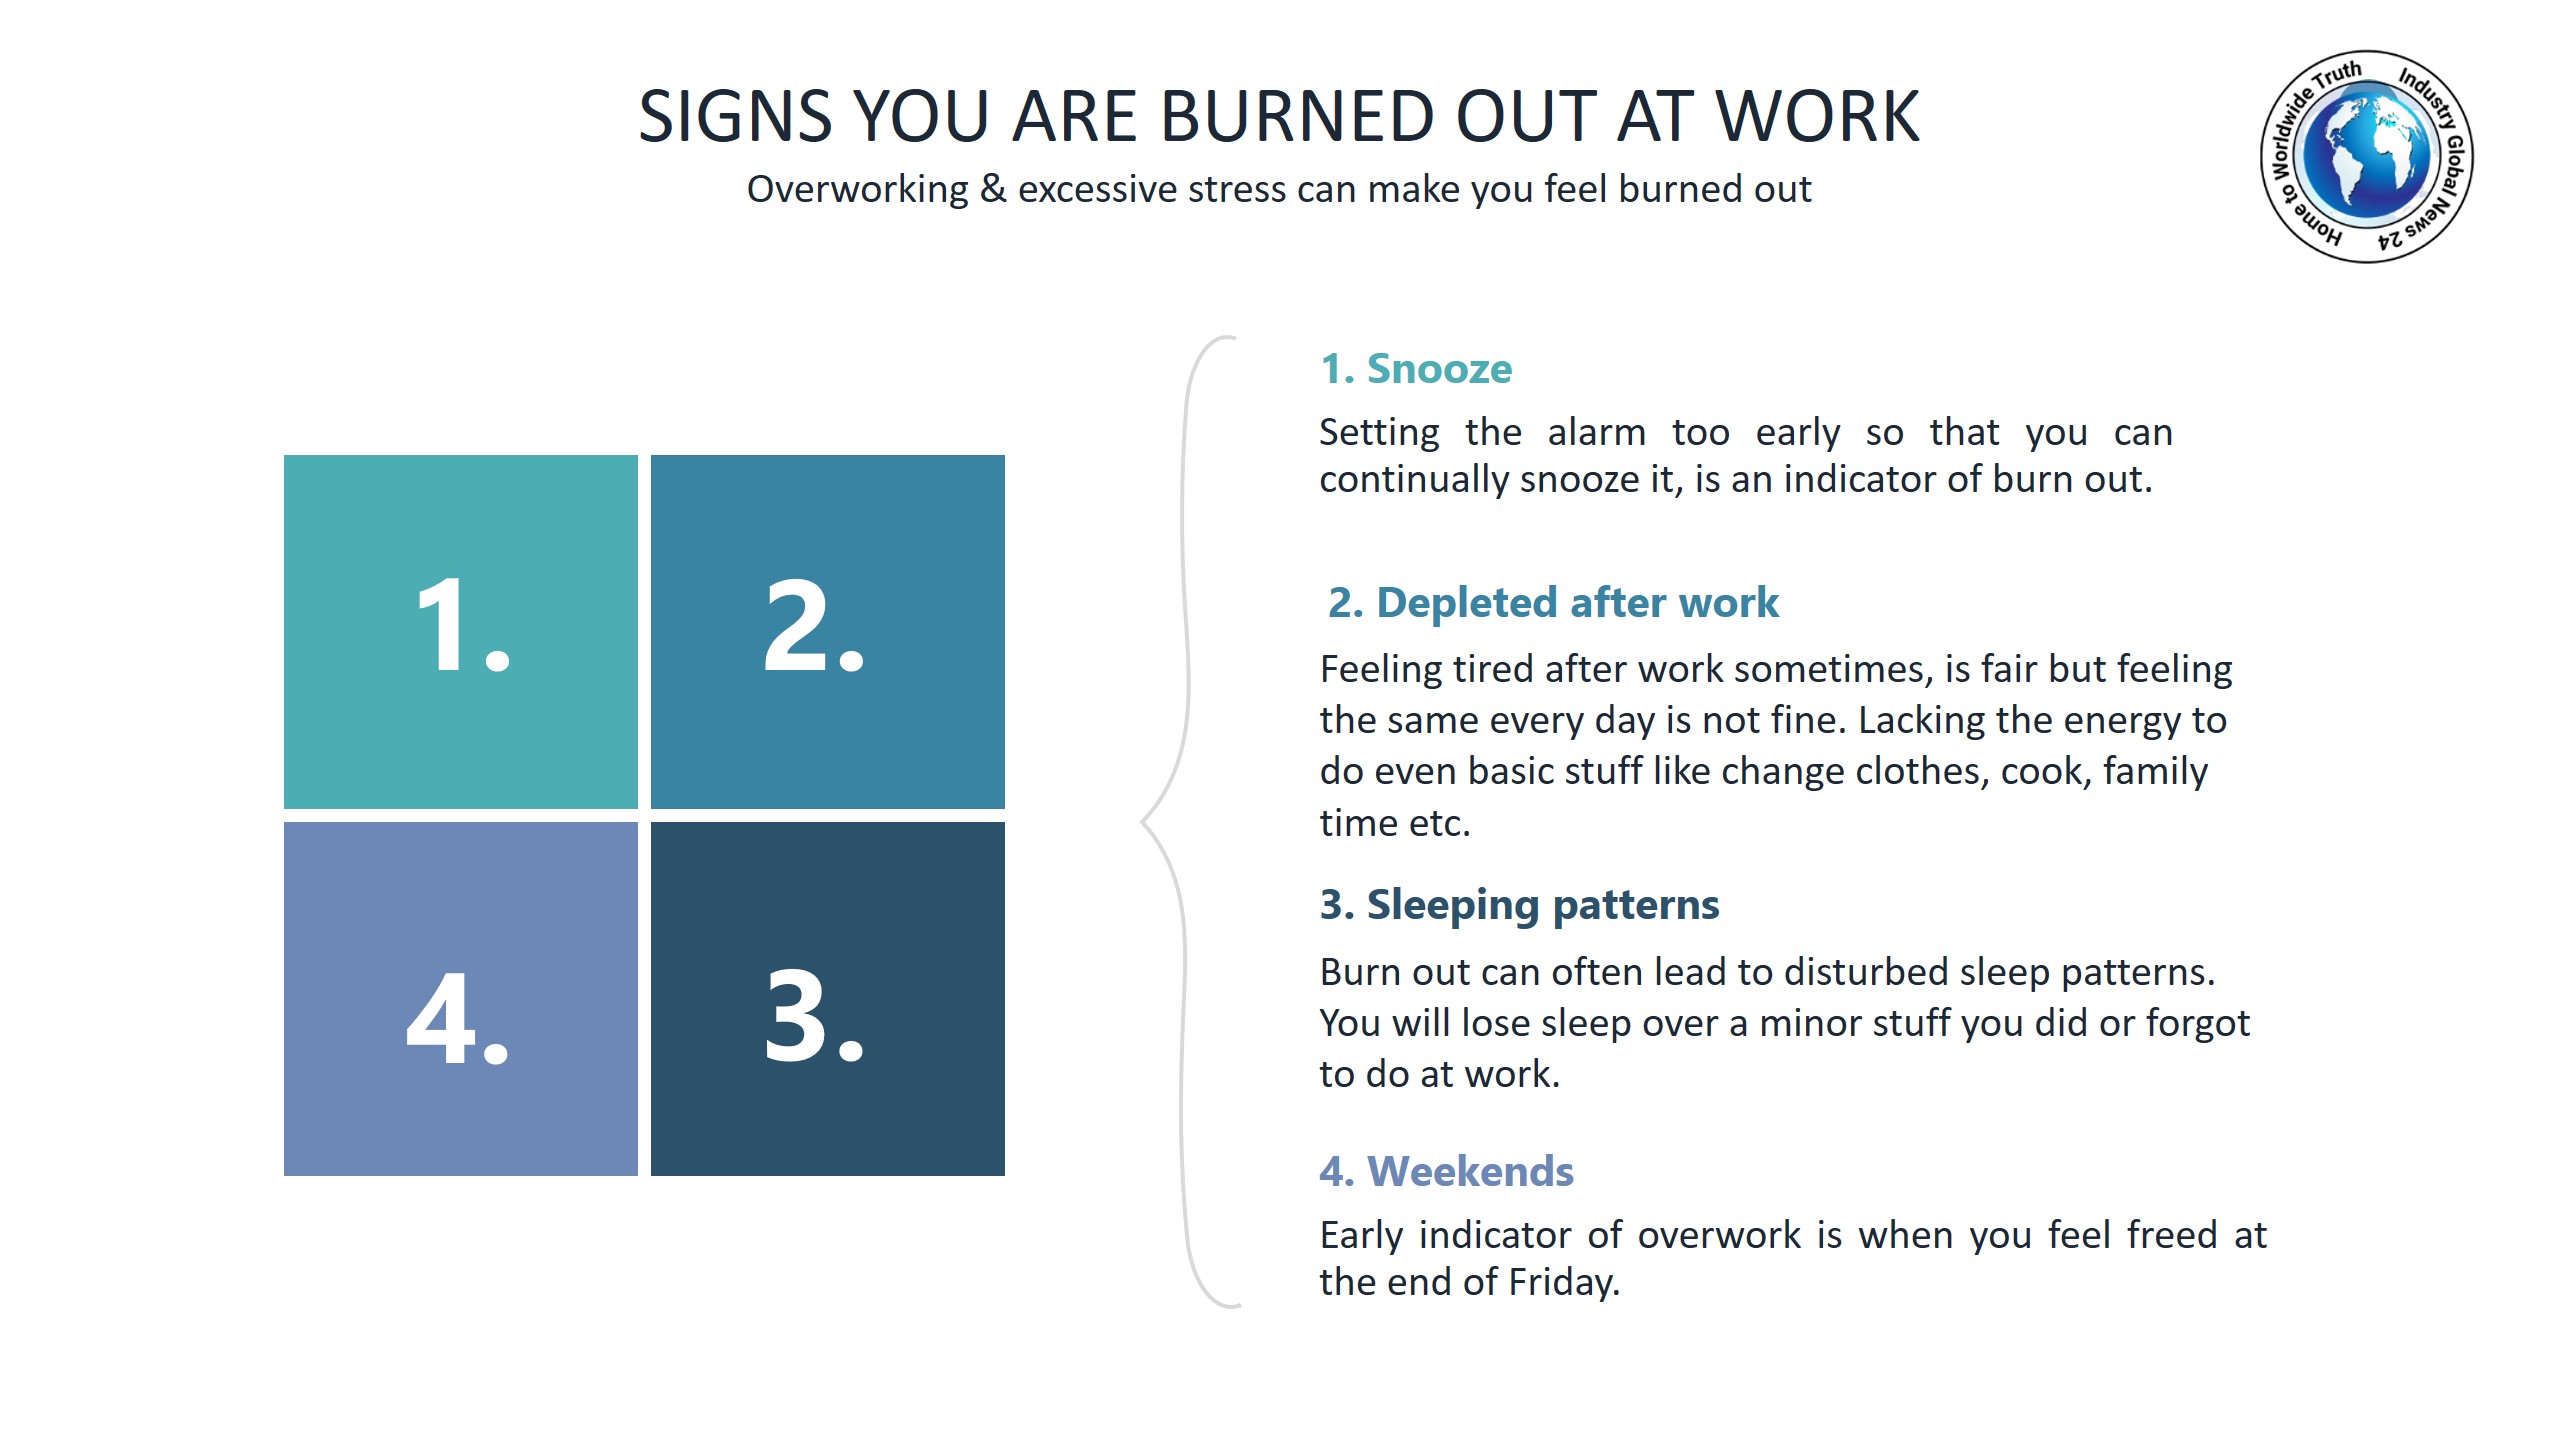 Signs you are burned out at work